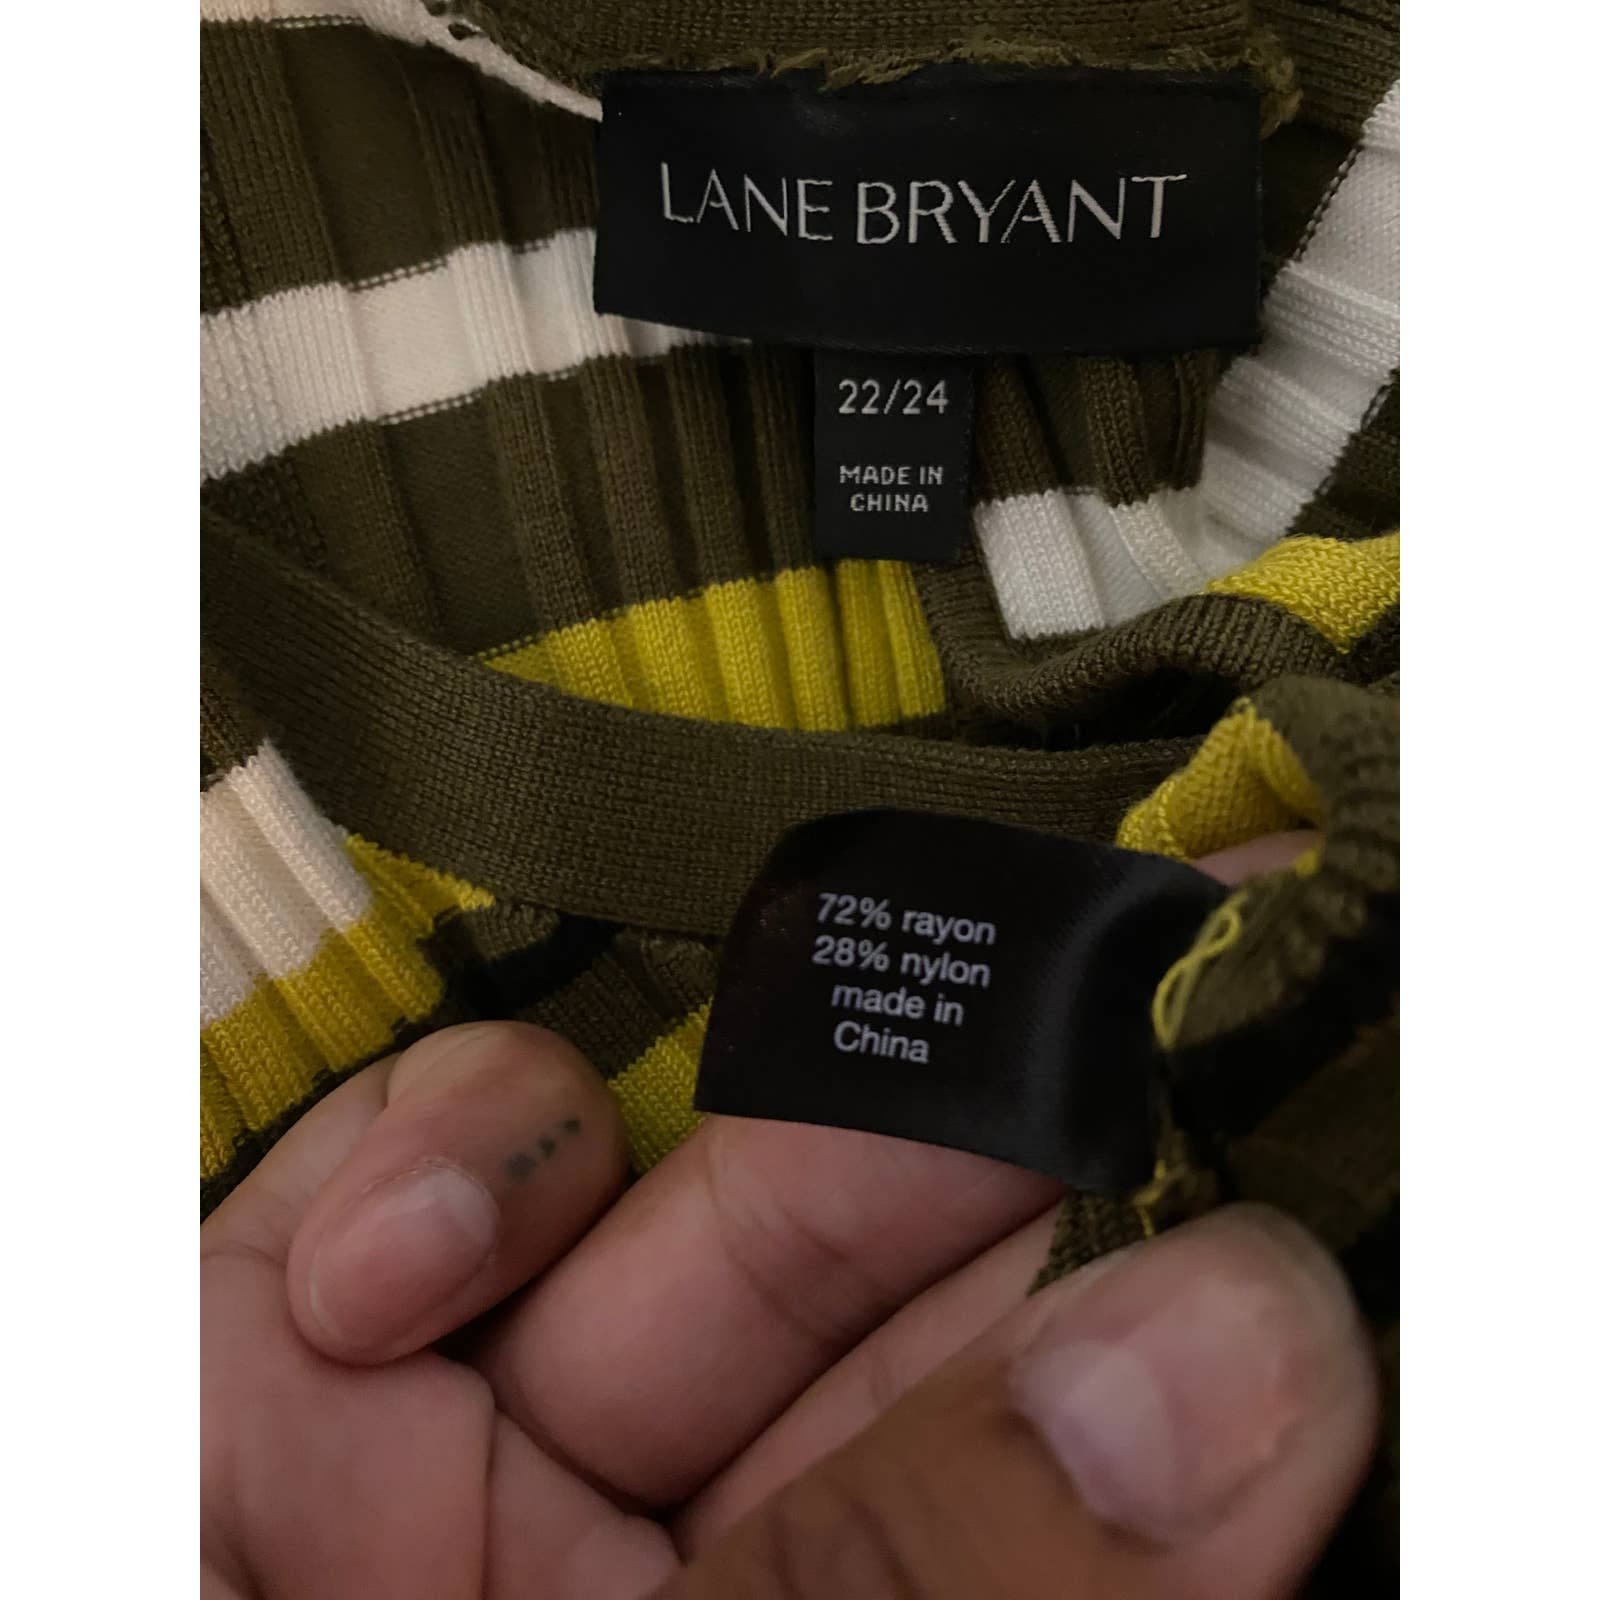 high discount Lane Bryant 22/24 Green Striped Ribbed Long Sleeve Top jdHPDs7hu outlet online shop